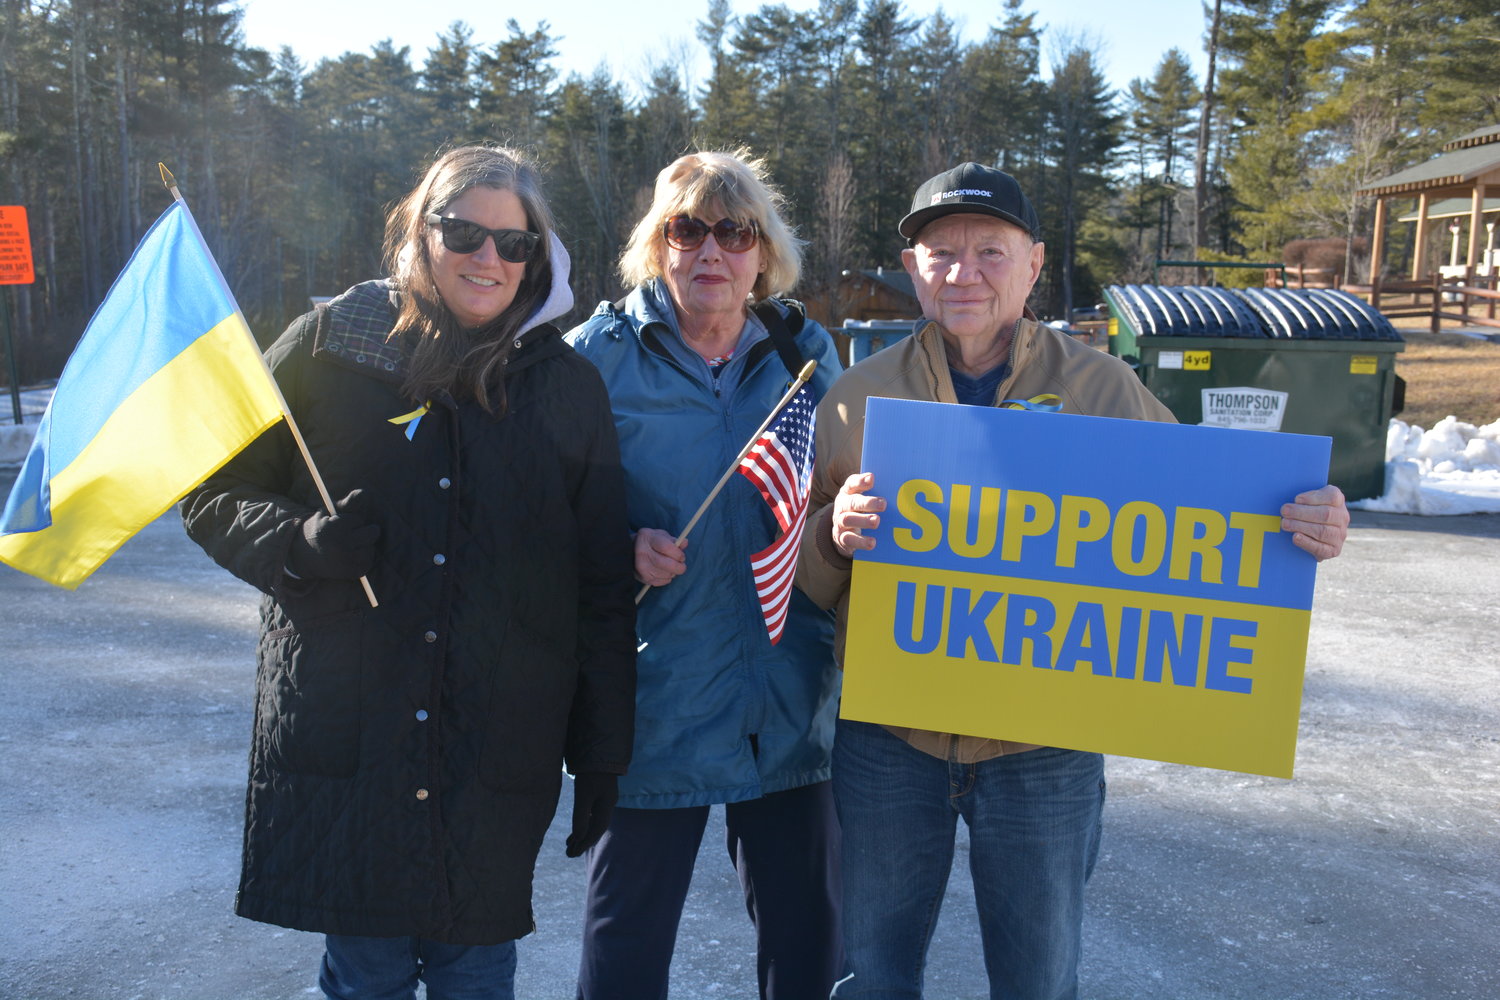 From the left, Yulan’s Elizabeth Sherwood, Tina Greenberger and Scottie Greenberger attended Friday’s Rally to show support for Ukraine.